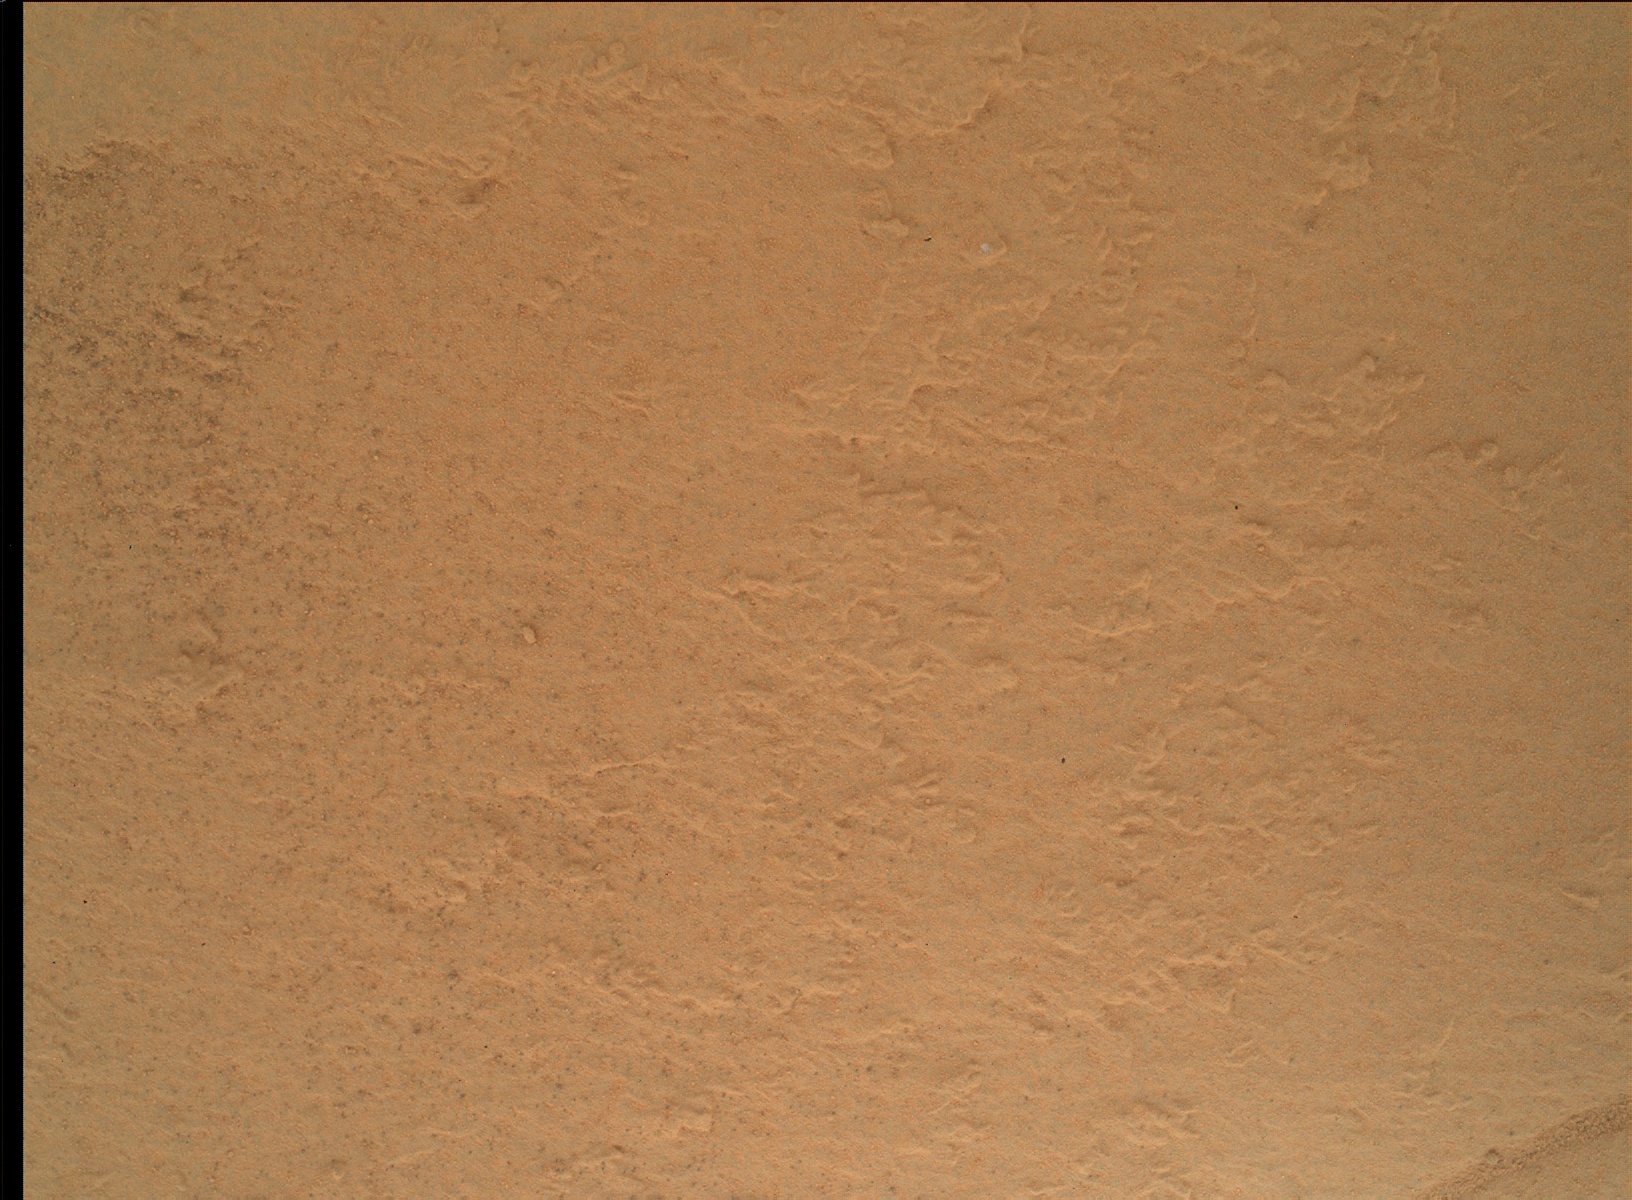 Nasa's Mars rover Curiosity acquired this image using its Mars Hand Lens Imager (MAHLI) on Sol 881